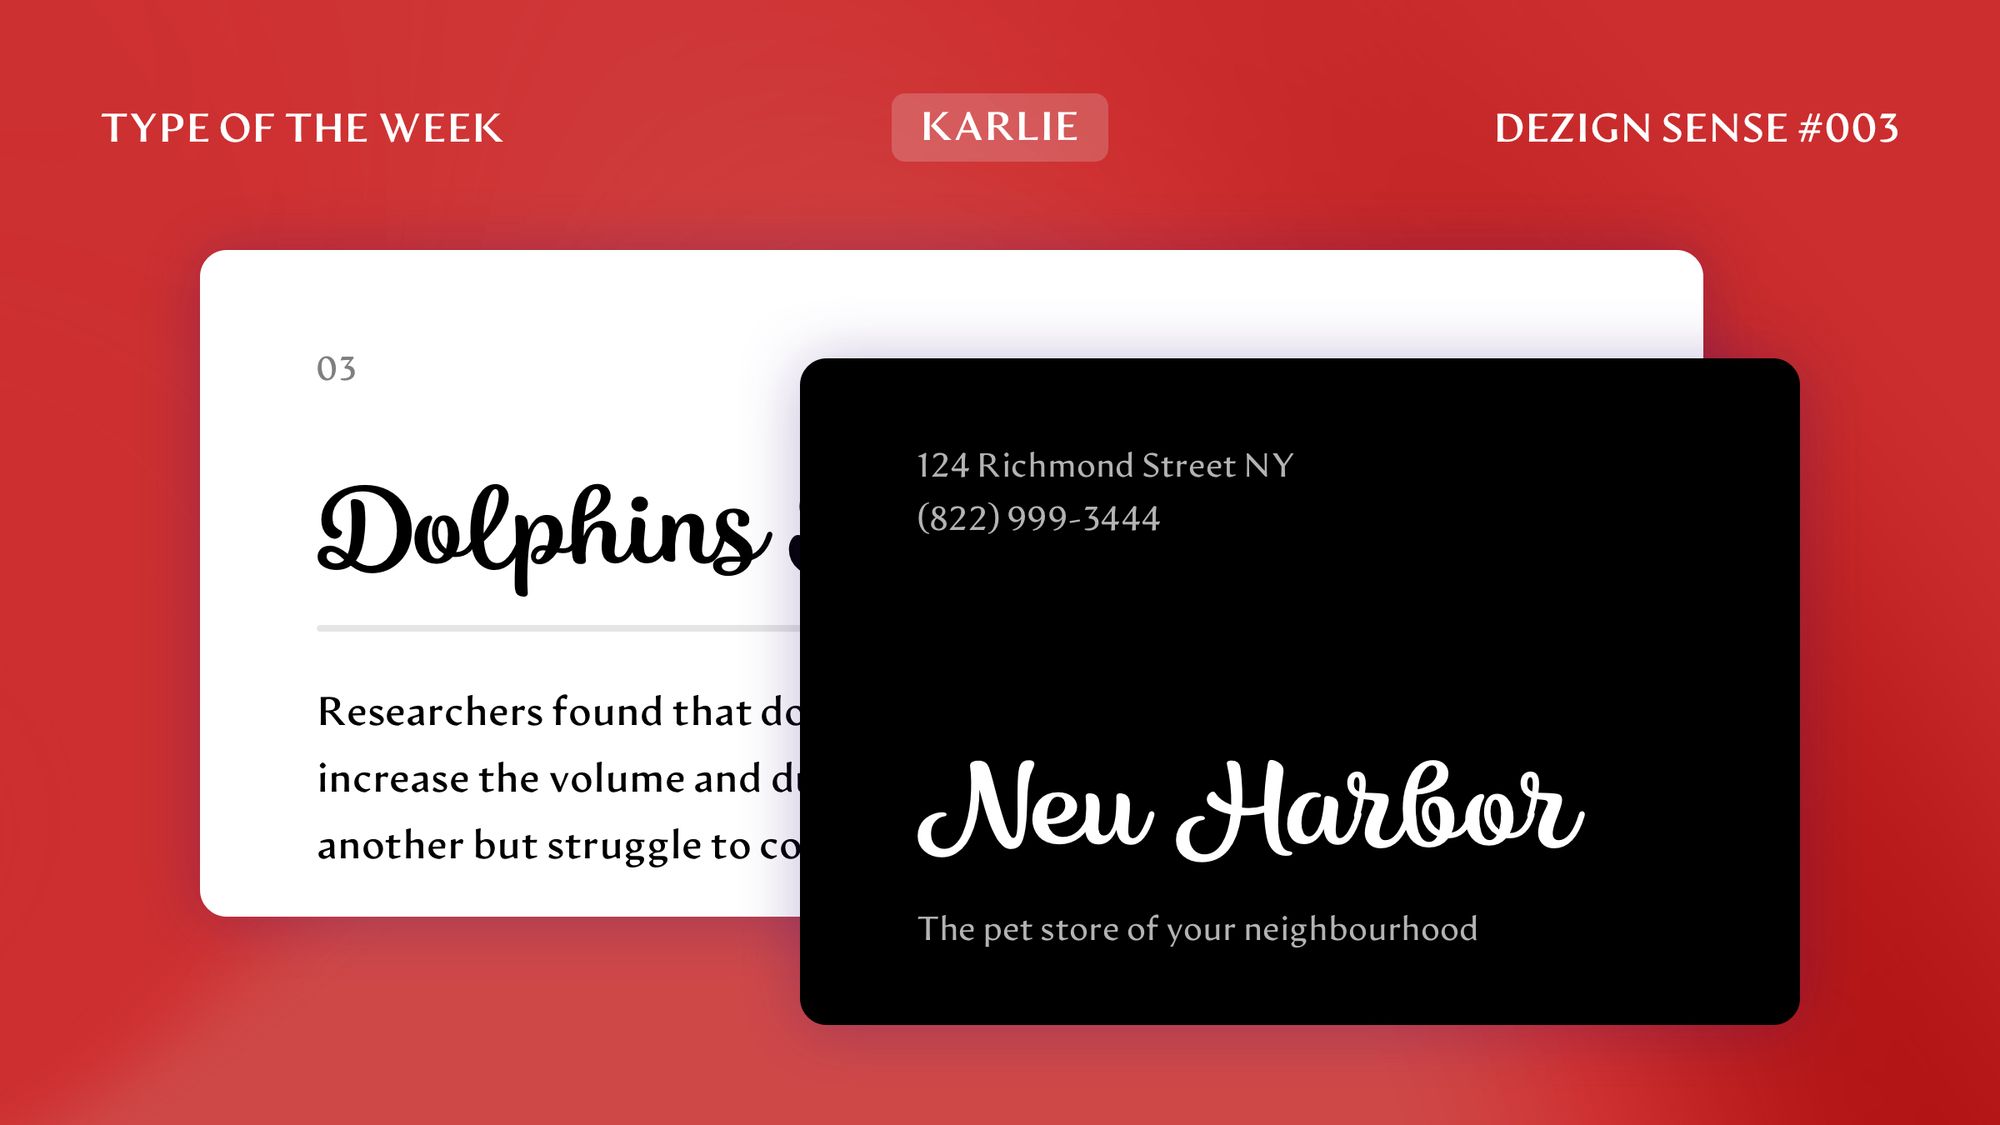 Graphic showing a snippet of a page and a business card, both using Artifex Hand. From top to bottom, the page snippet has page number 03, title Renaissance and text description of renaissance. Business card has two line address, fictional store name "New Harbor" and tagline that says "The lighting store for your home".